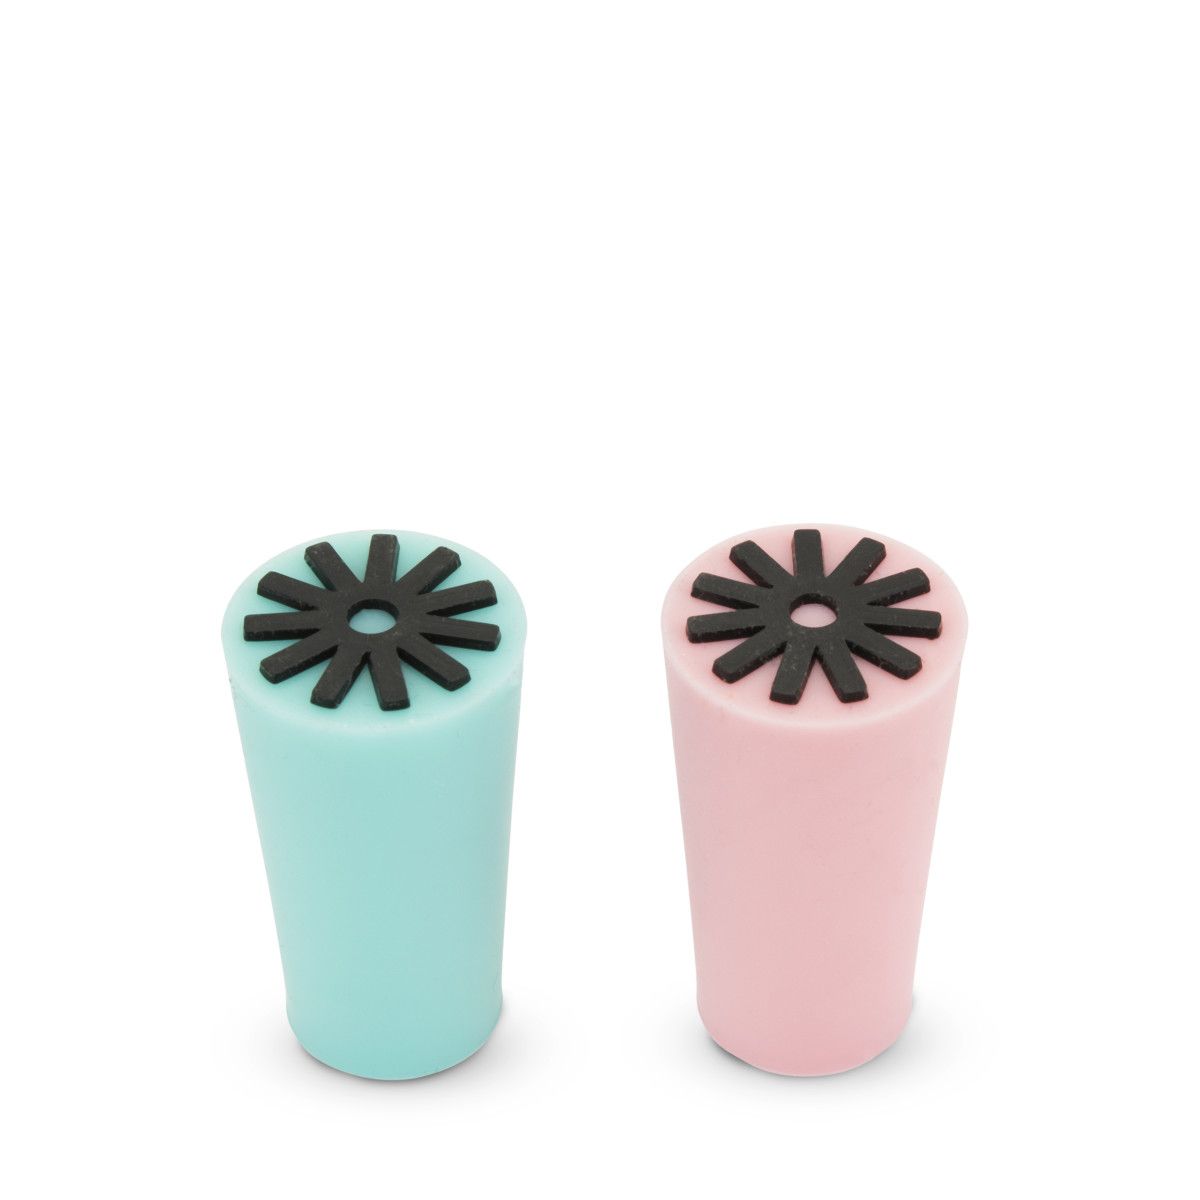 Silicone Bottle Stopper - Set of 2